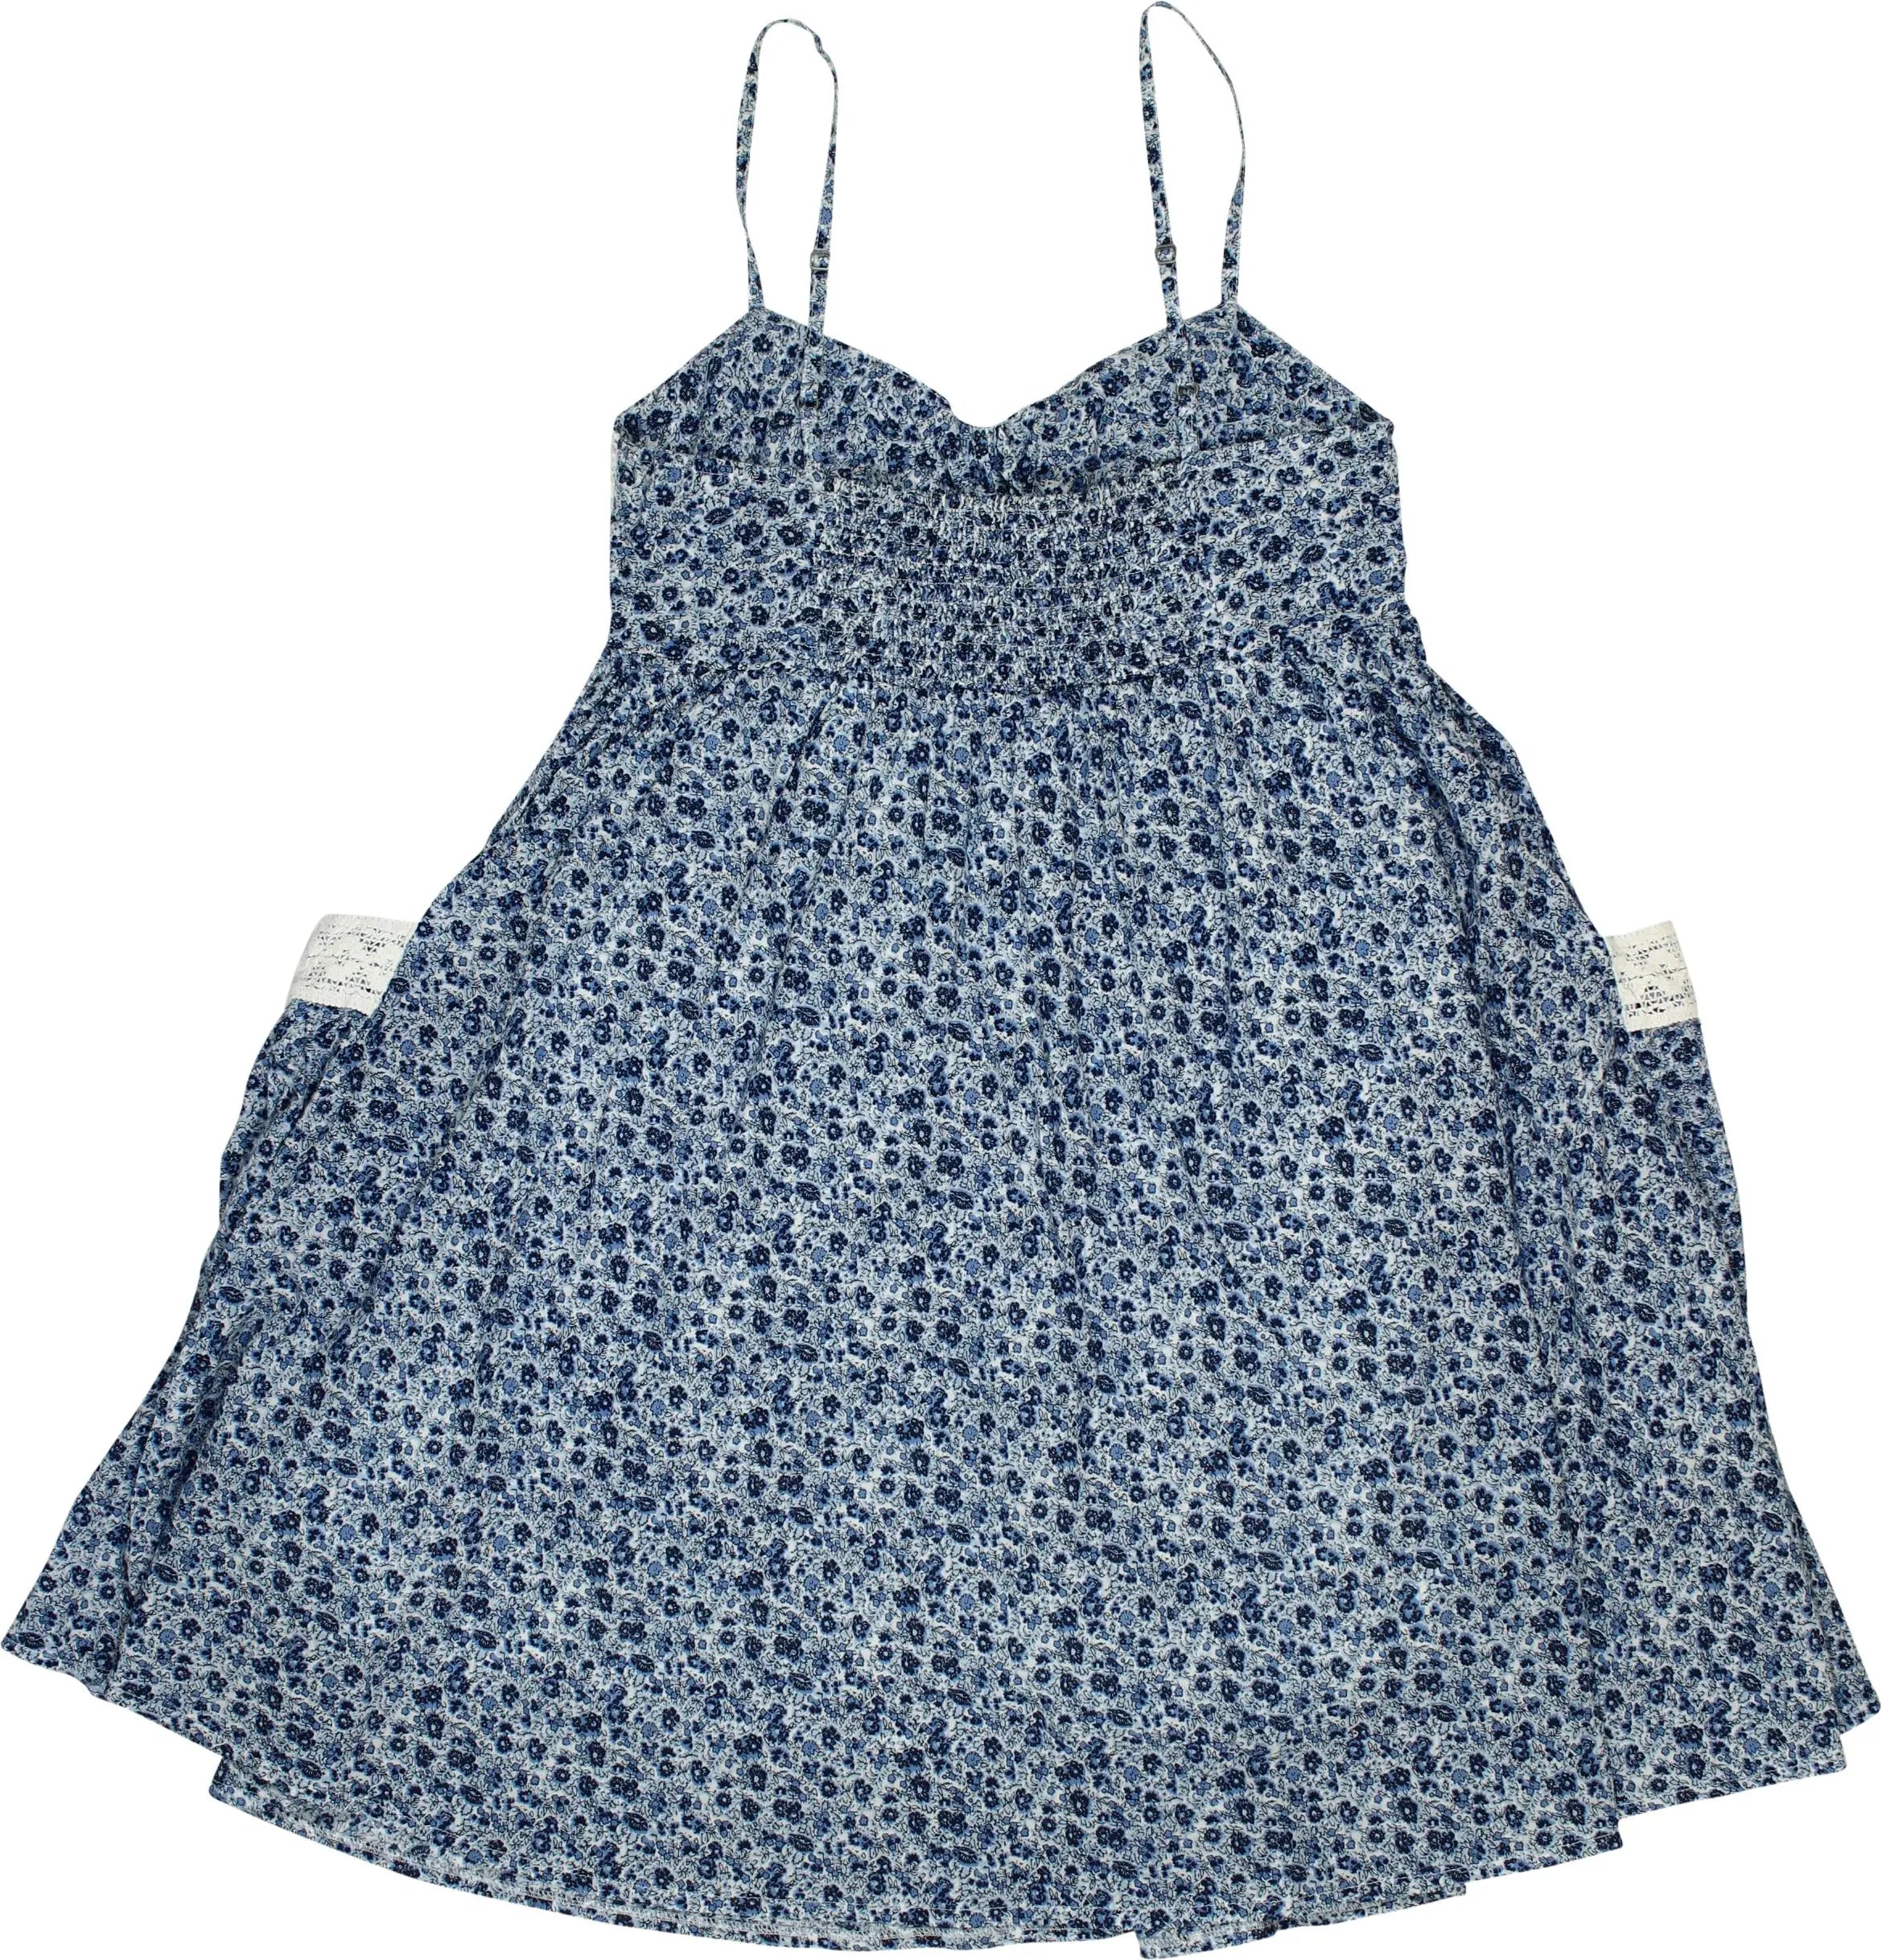 Att. - Blue Floral Dress by ATT- ThriftTale.com - Vintage and second handclothing